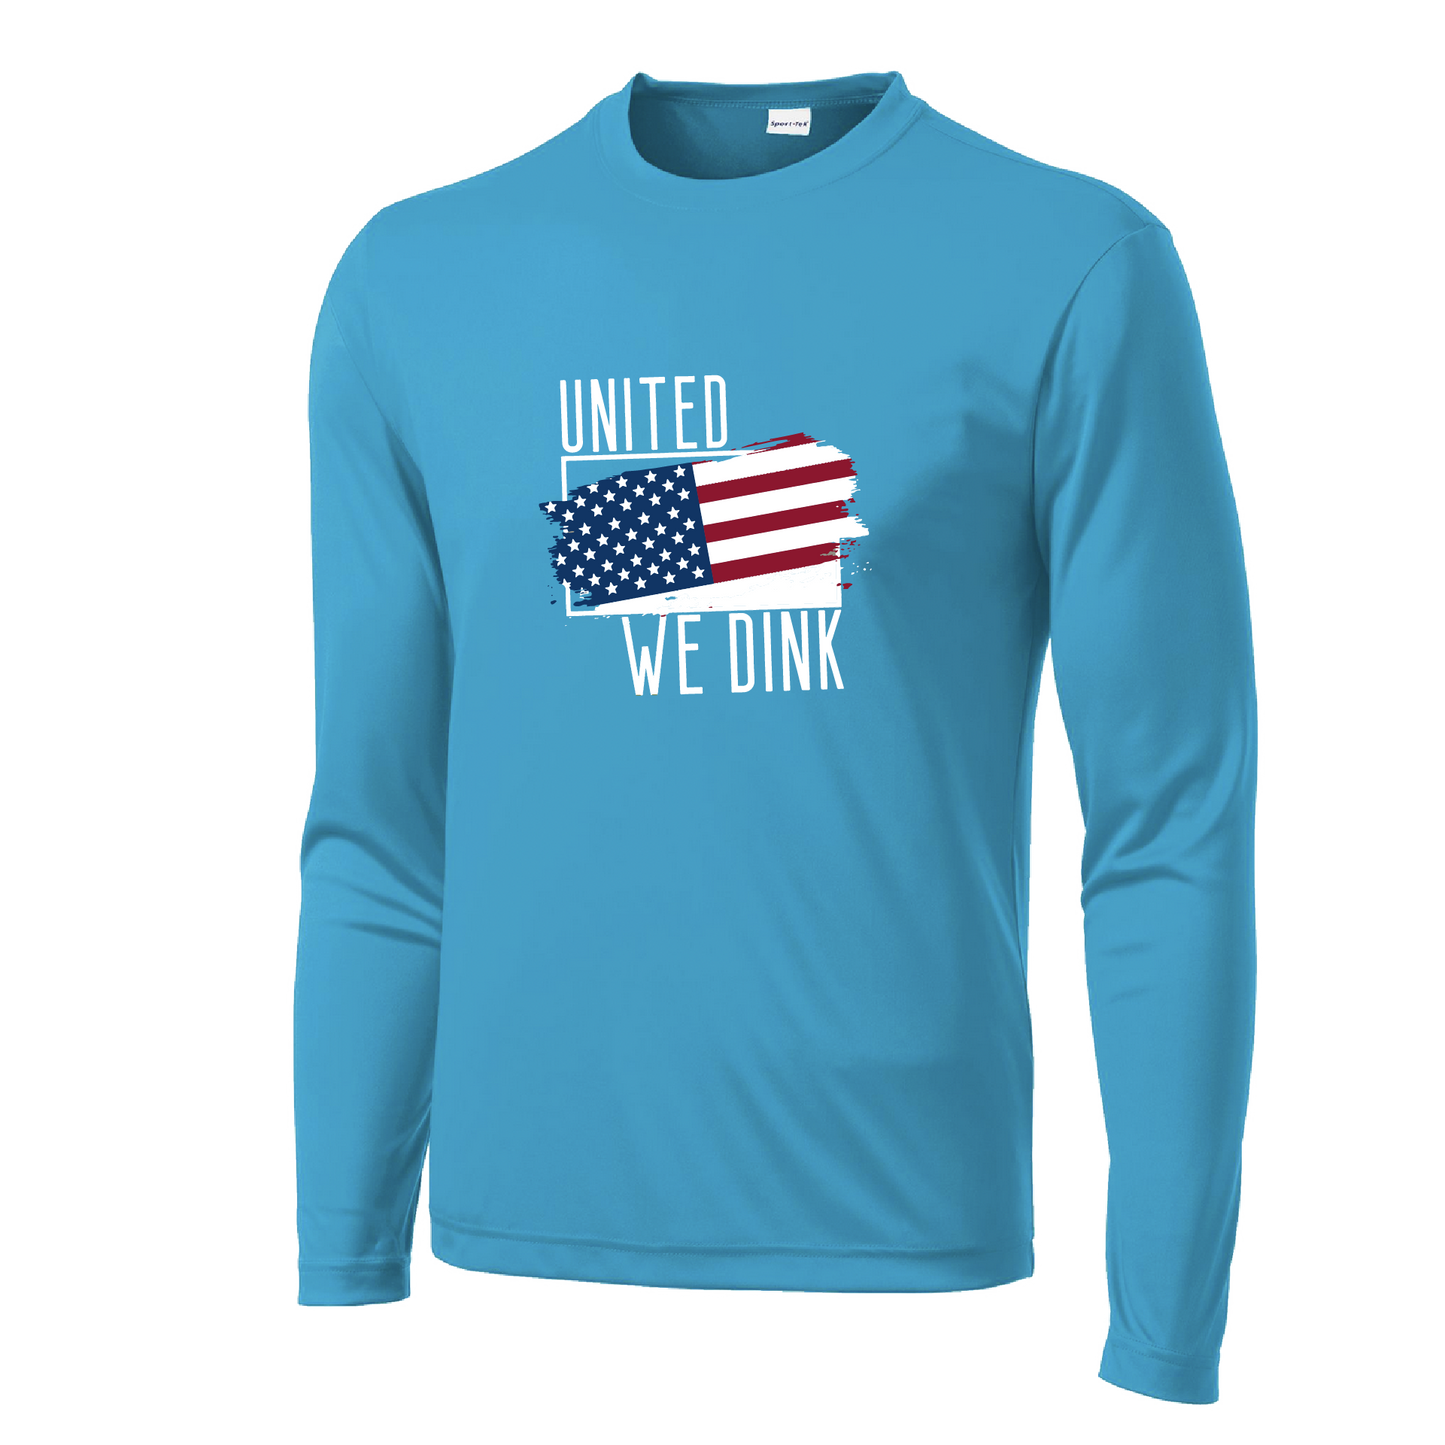 Pickleball Design: United We Dink  Men's Styles: Long-Sleeve  Shirts are lightweight, roomy and highly breathable. These moisture-wicking shirts are designed for athletic performance. They feature PosiCharge technology to lock in color and prevent logos from fading. Removable tag and set-in sleeves for comfort.